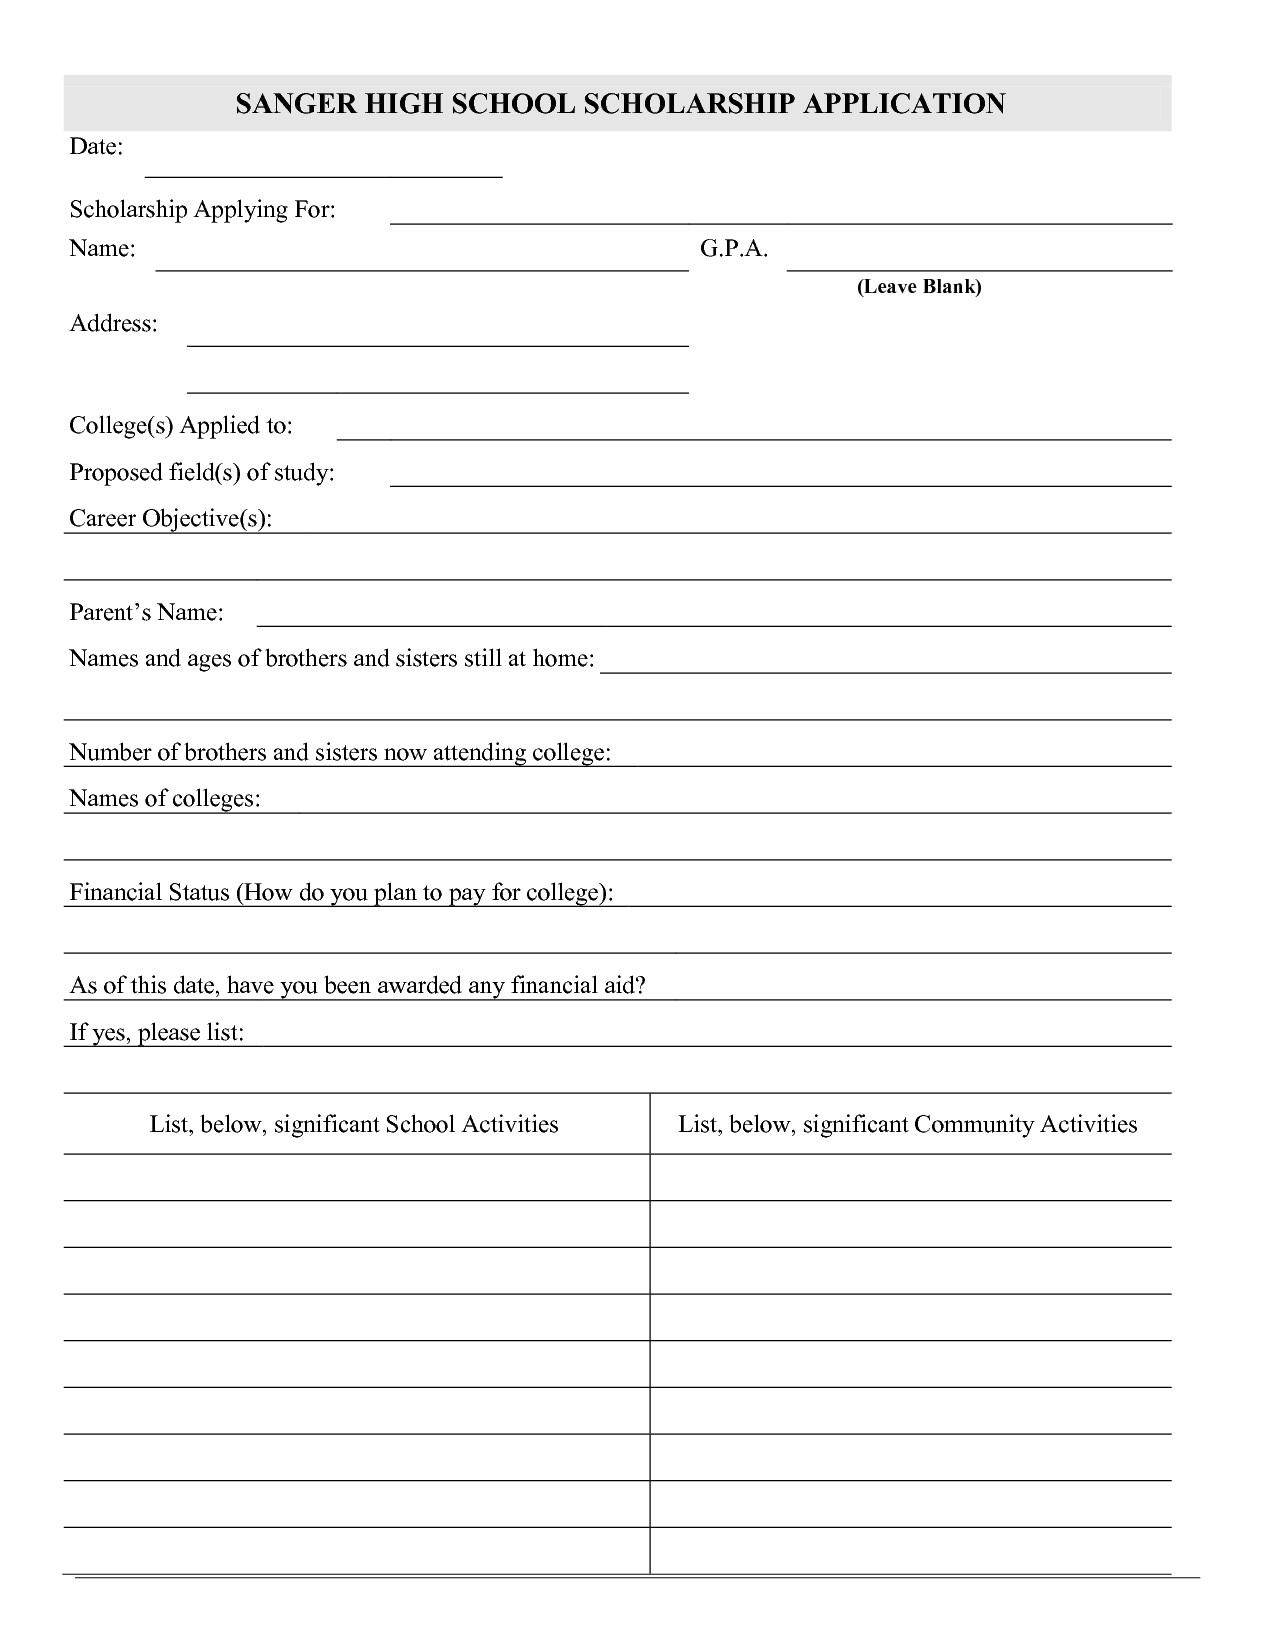 Blank Scholarship Application Template Contest Entry forms Template Blank Gagnatashort